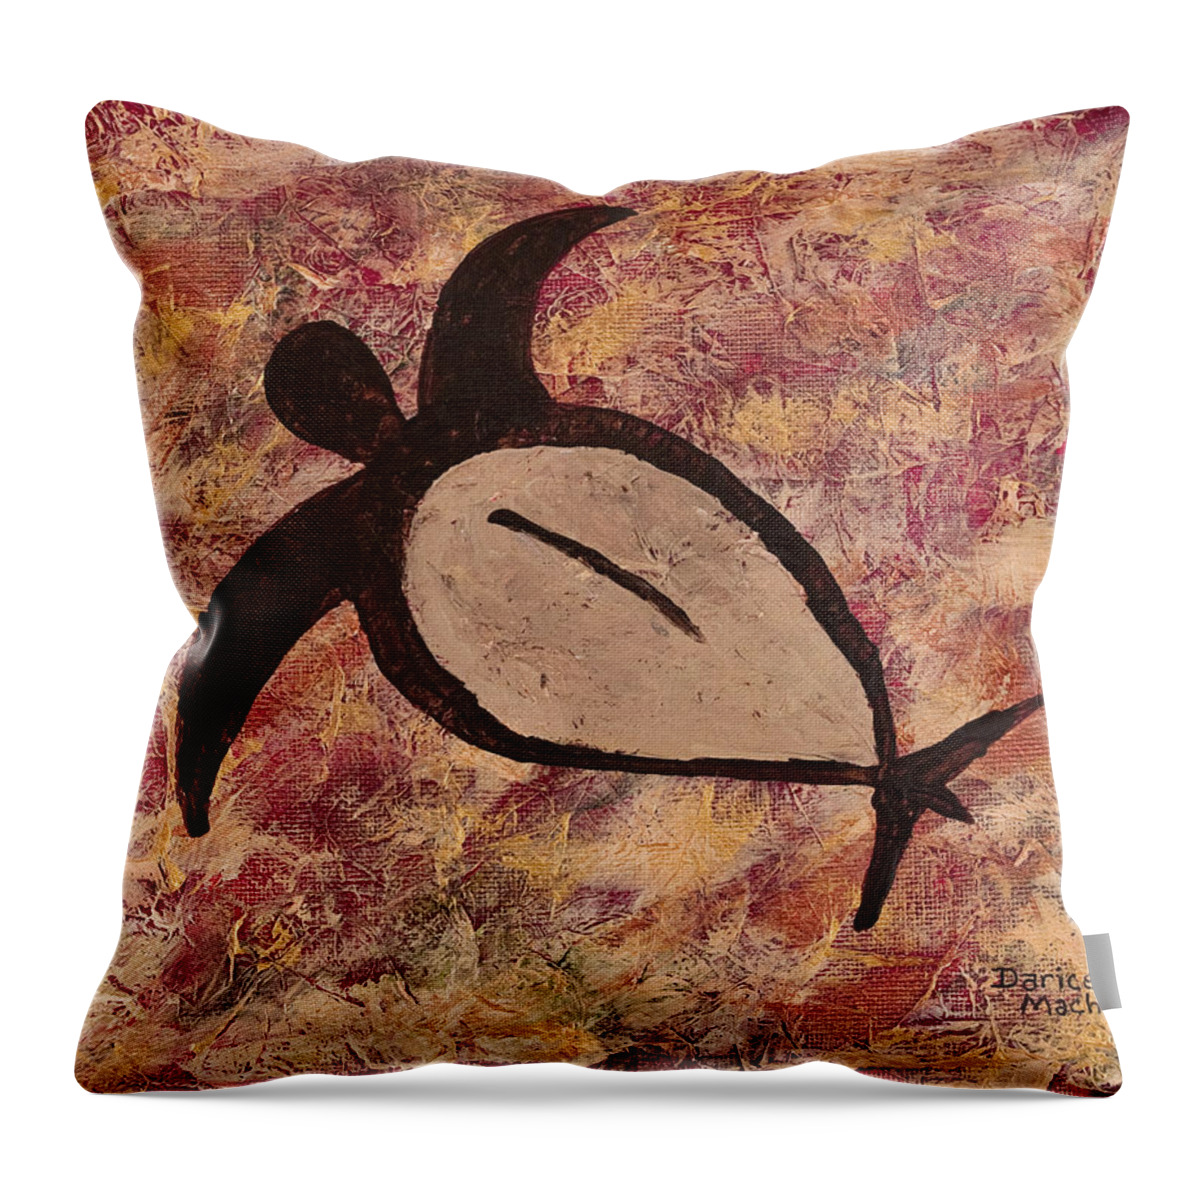 Sea Turtle Throw Pillow featuring the painting Honu by Darice Machel McGuire